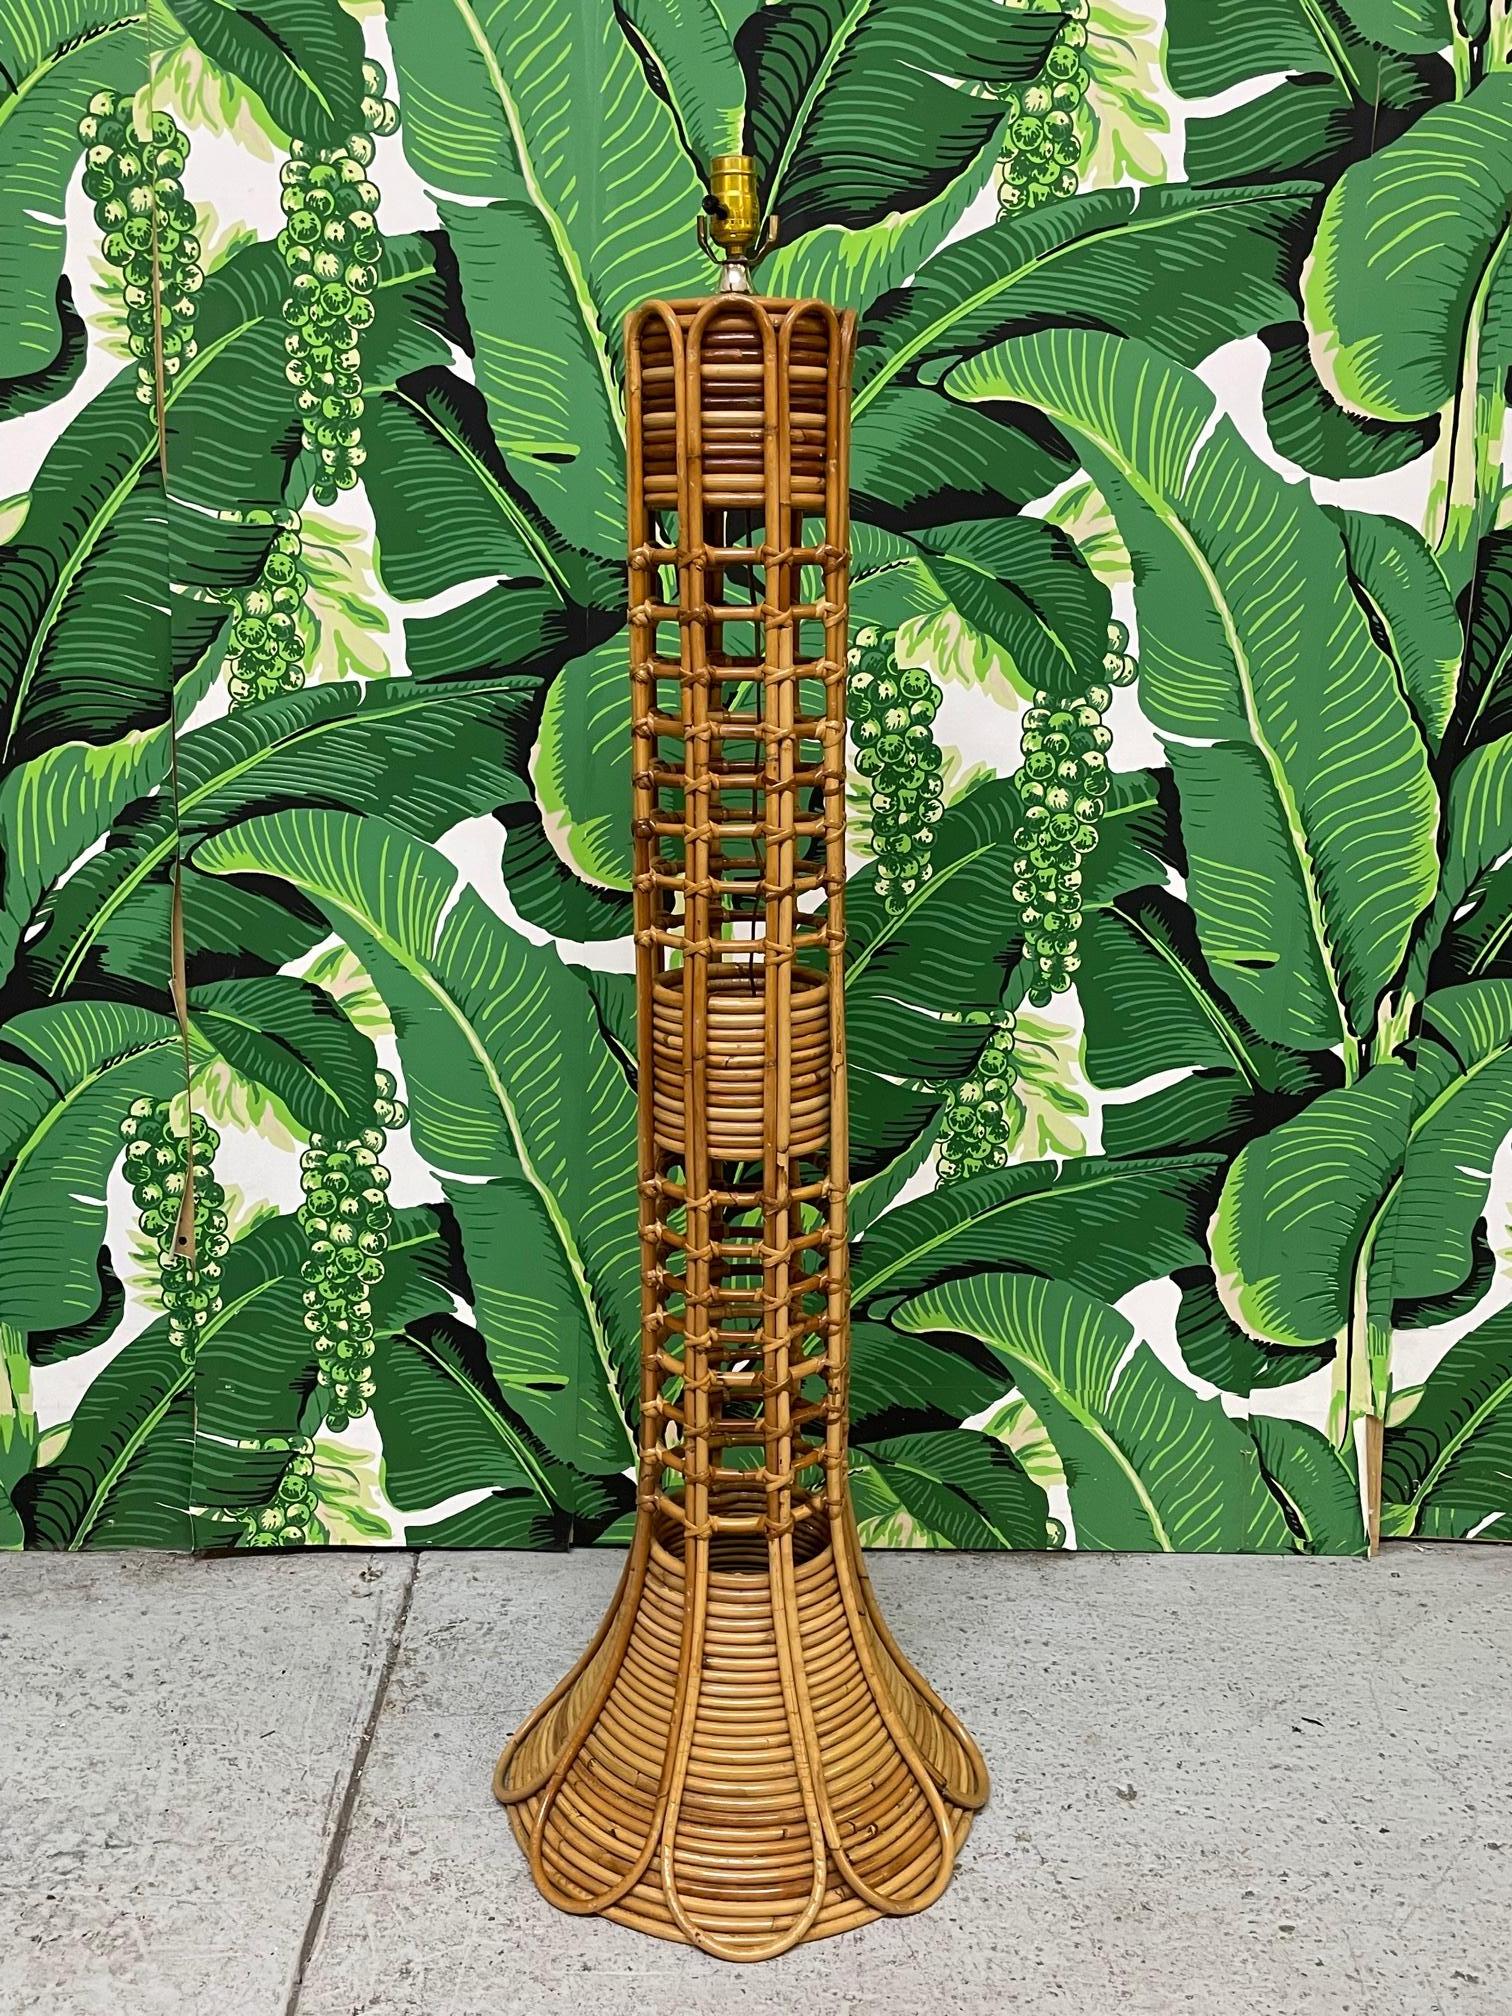 Vintage rattan floor lamp features stacked rattan base and unique fretwork. Top covered in woven wicker. Good condition with minor imperfections consistent with age.

 